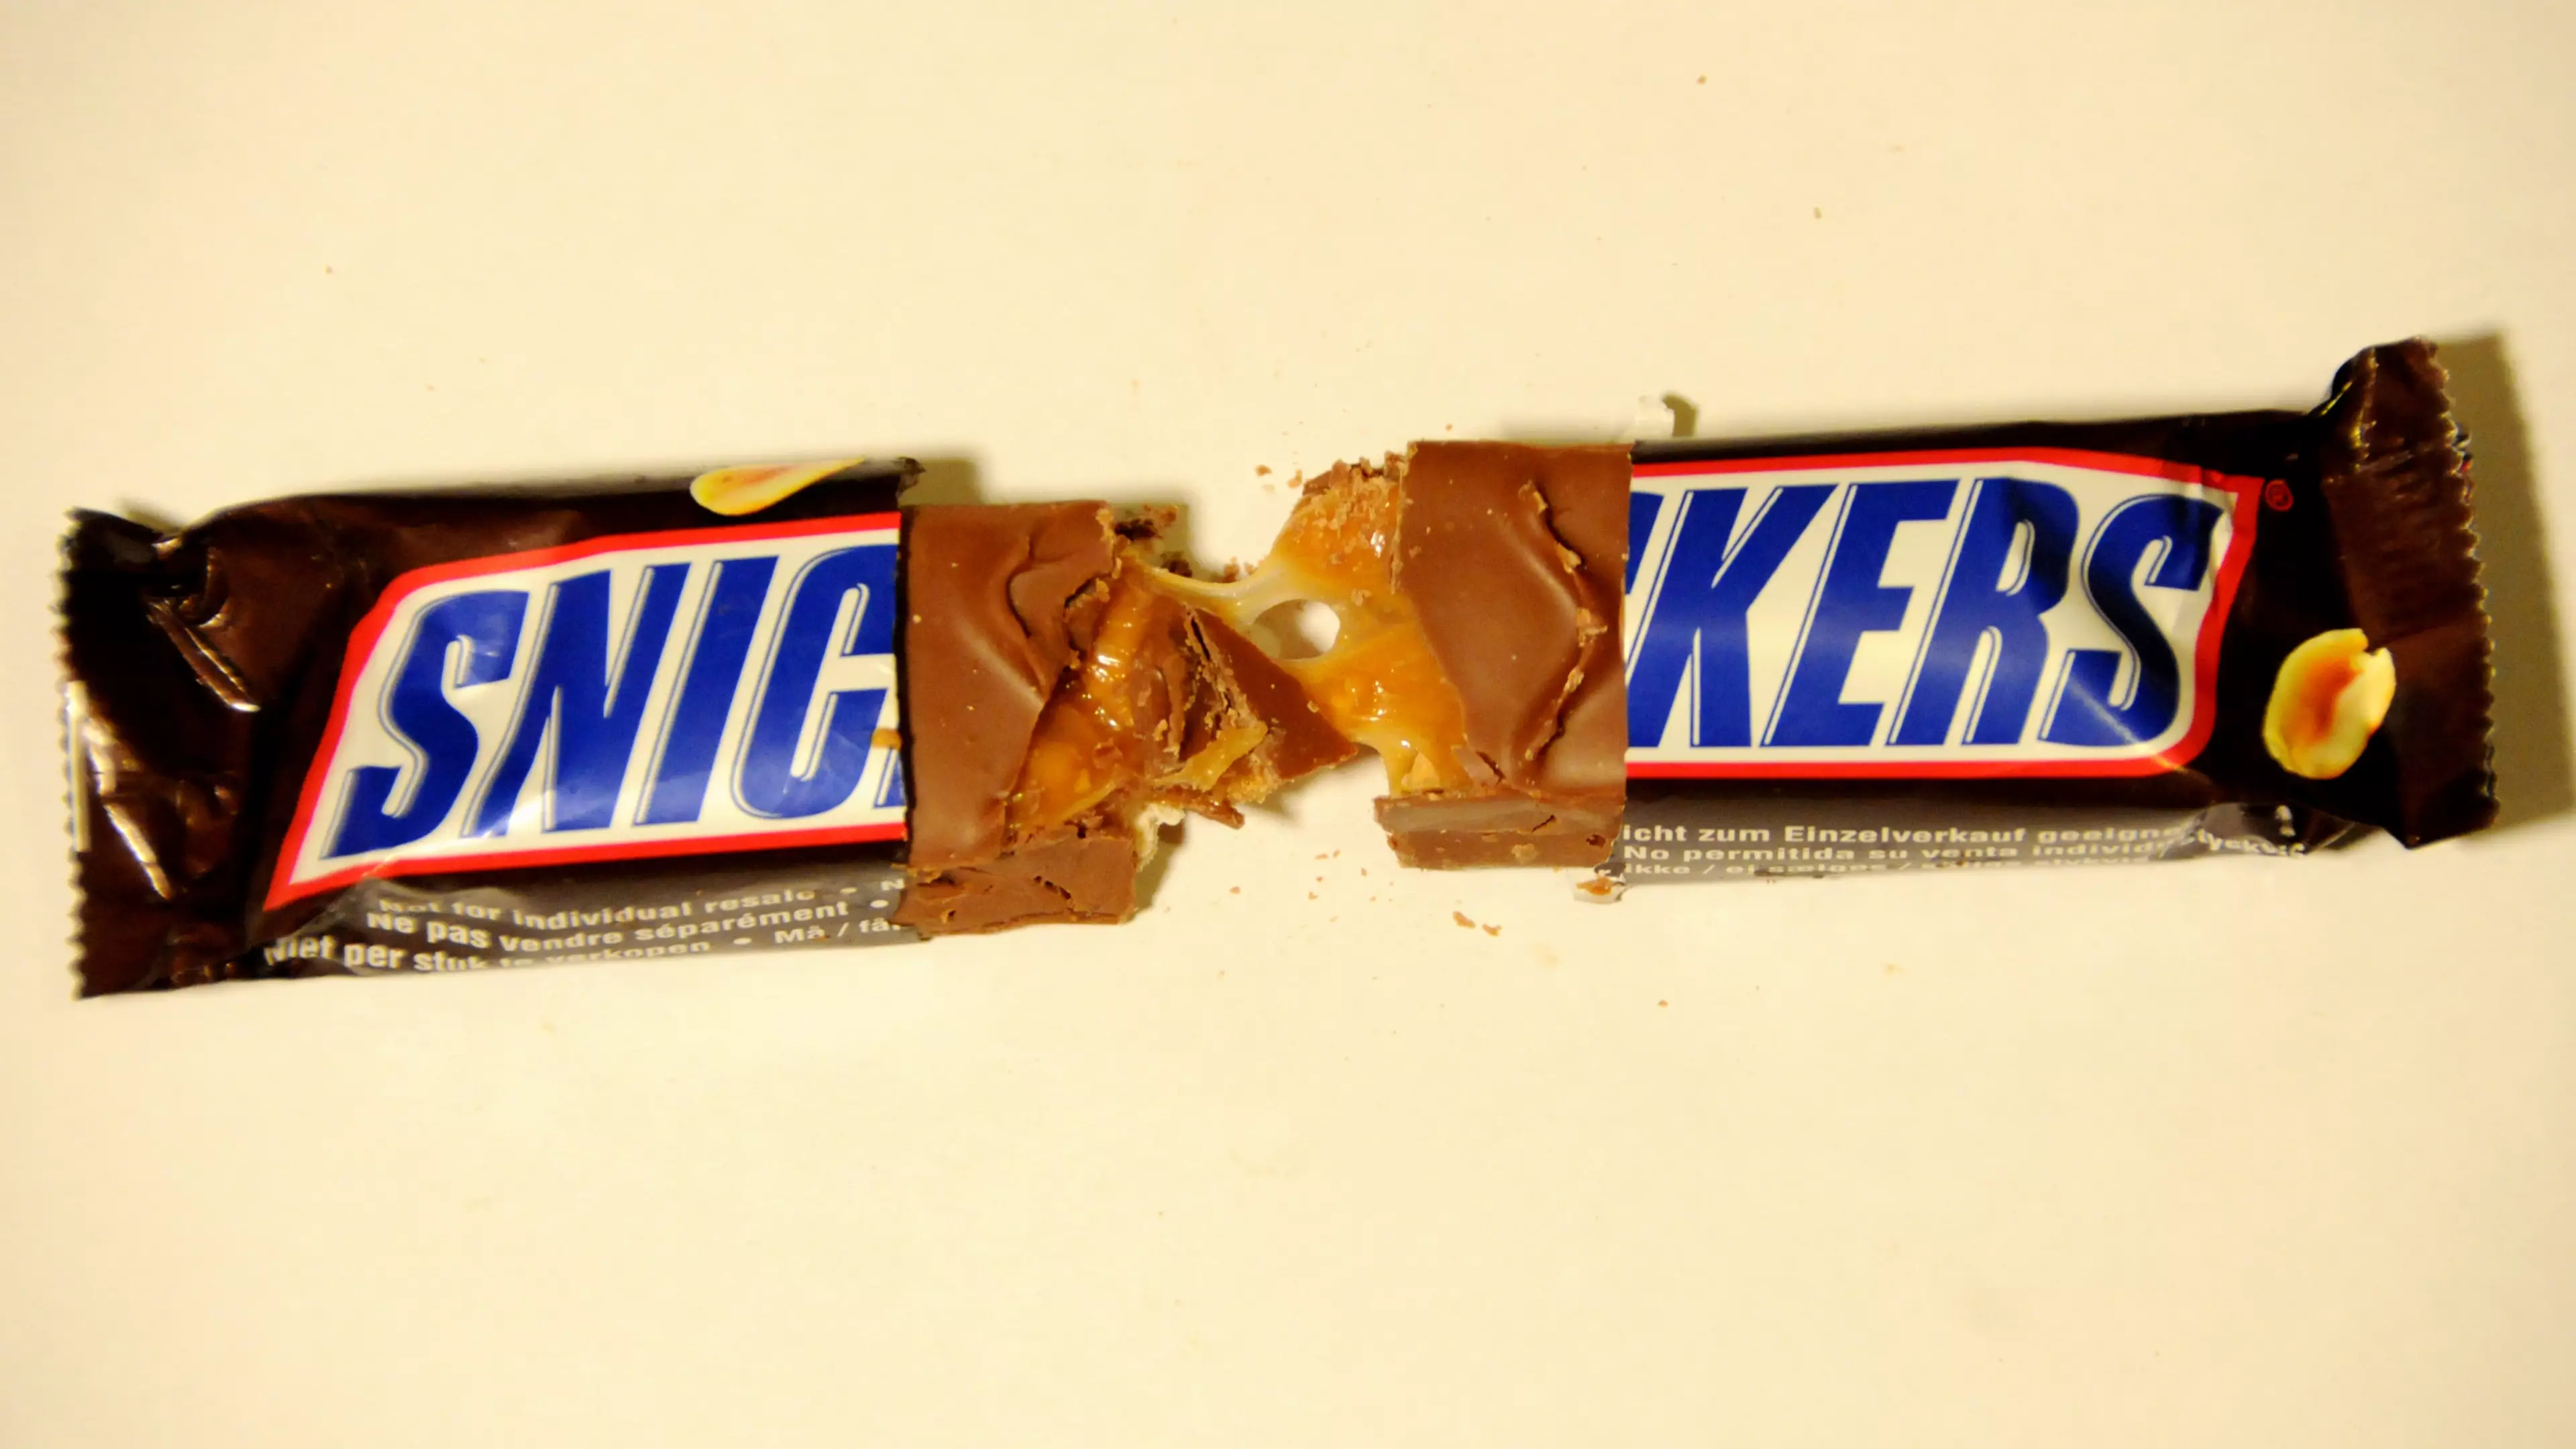 Aussies Threaten To Boycott Snickers After Finding Out They're Made In China